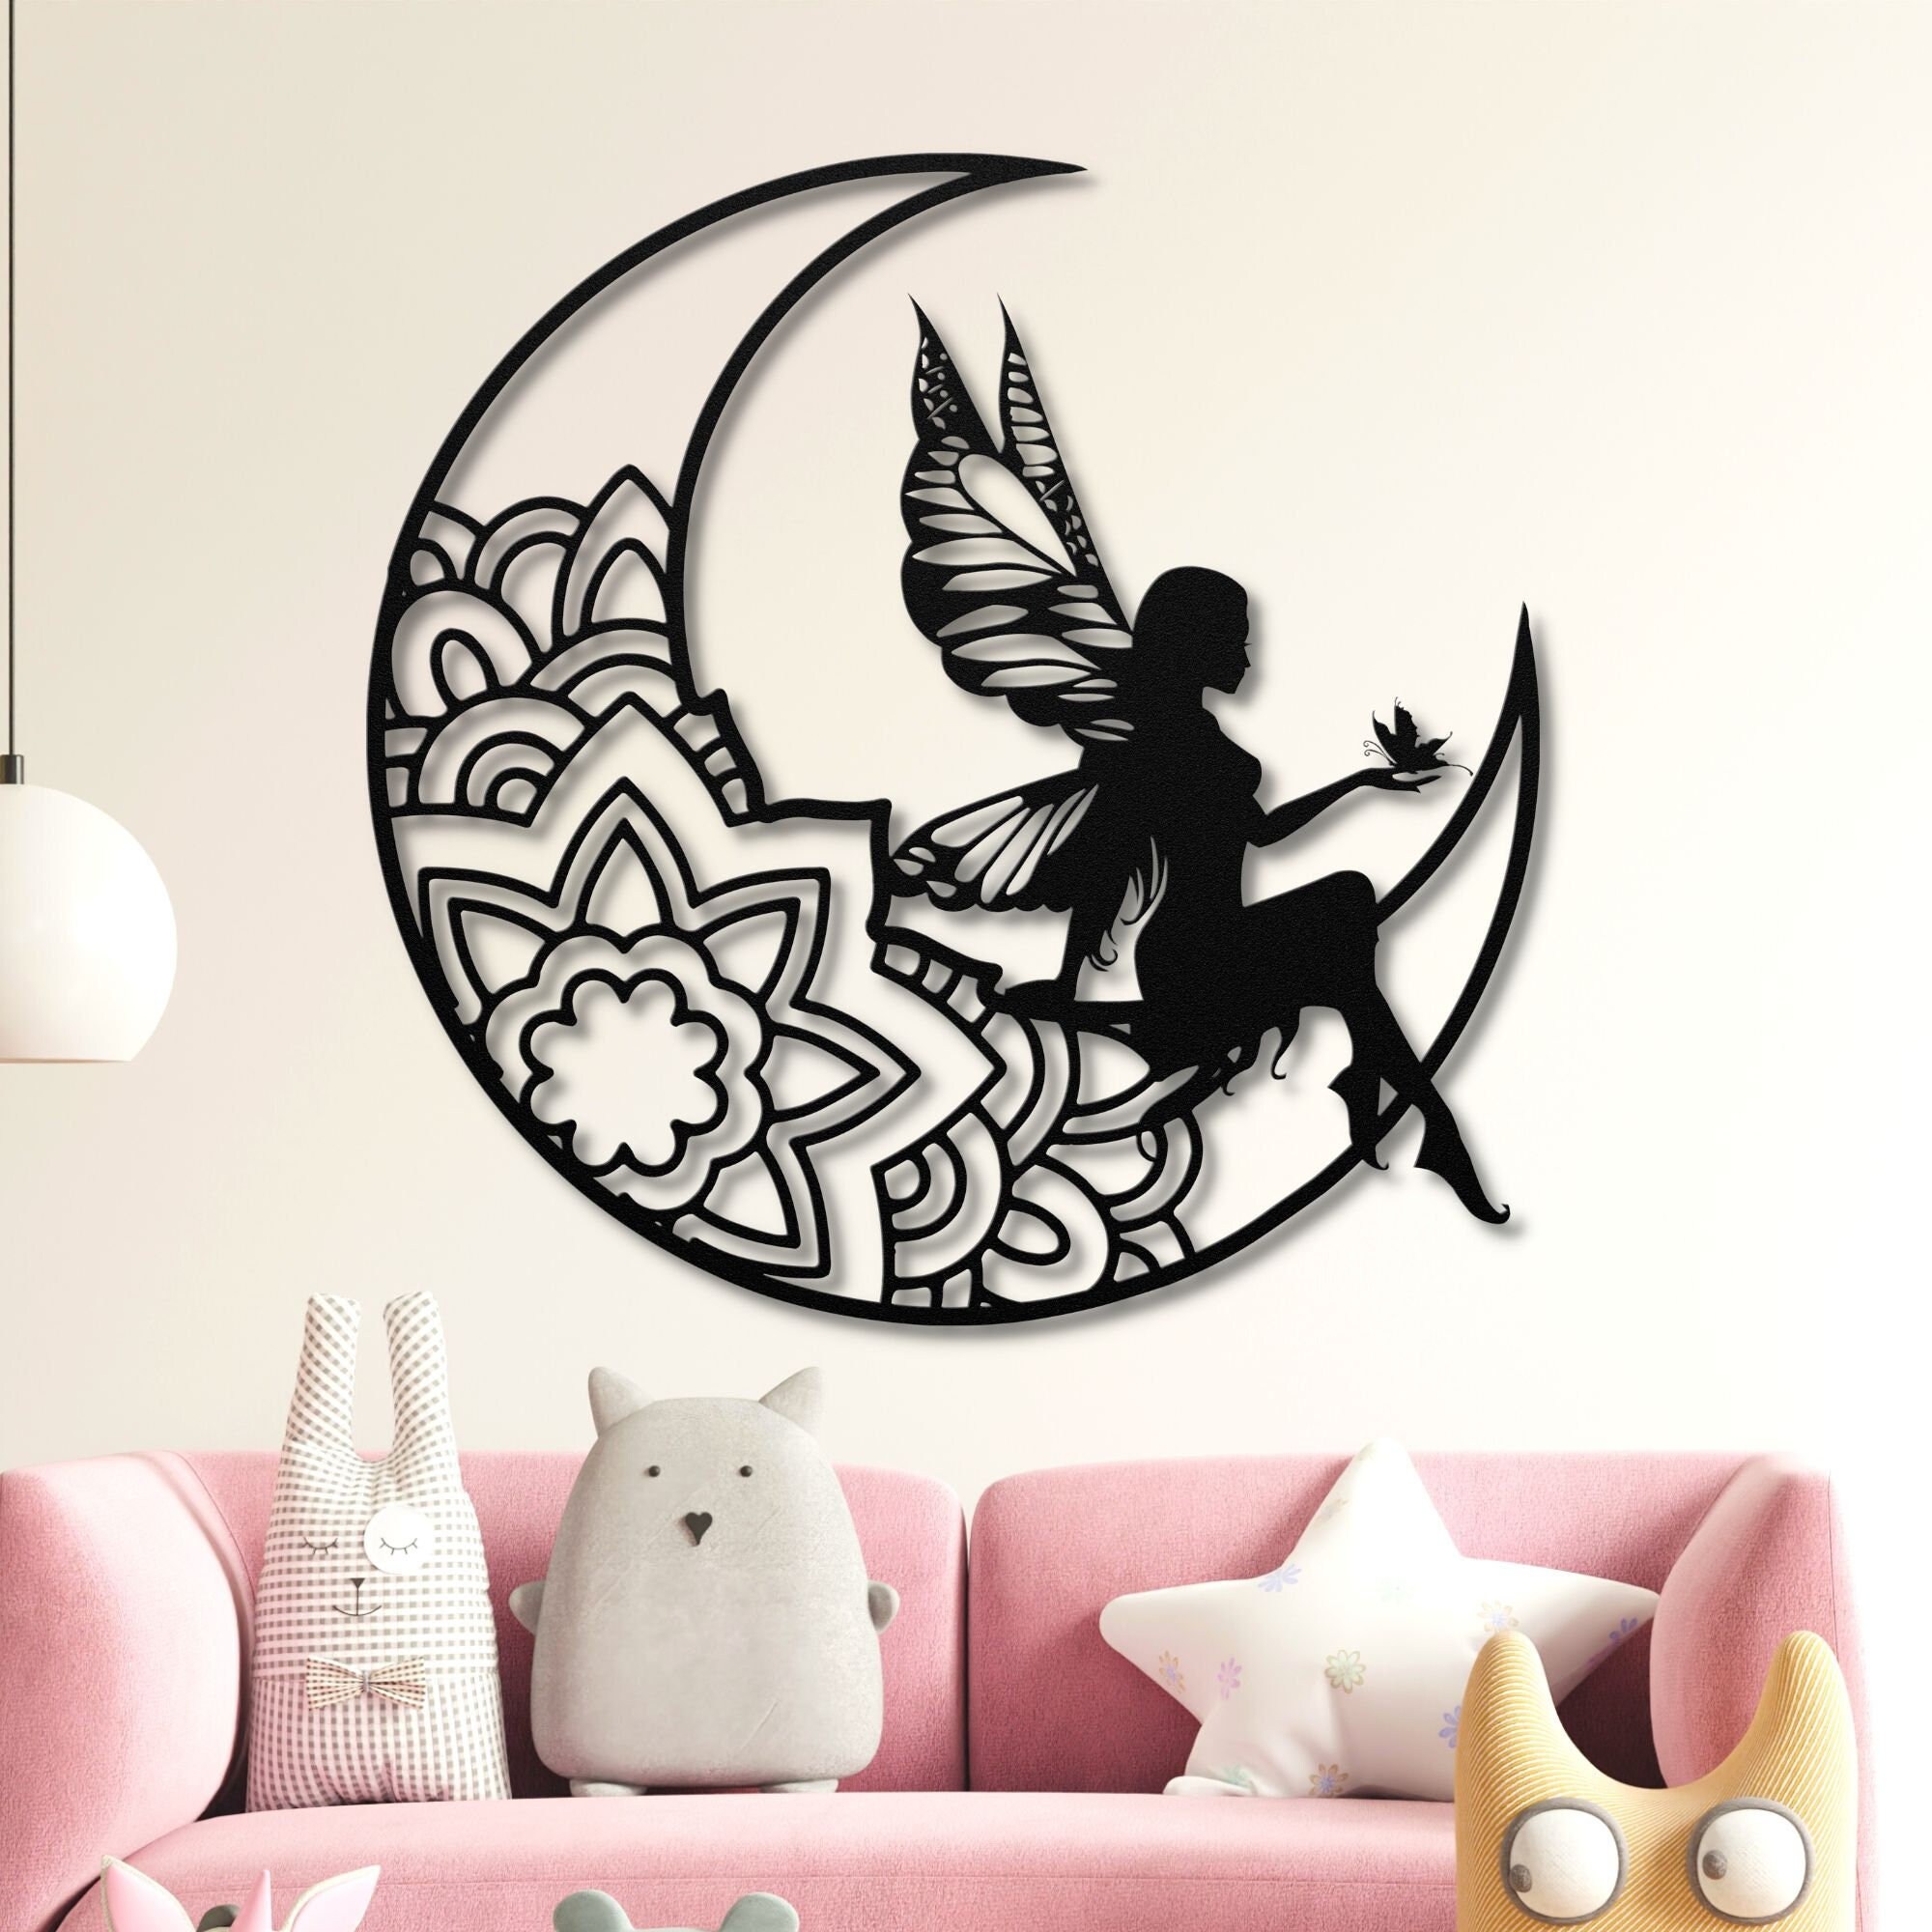 Dancing in the Moonlight Fairy Stickers, Zazzle